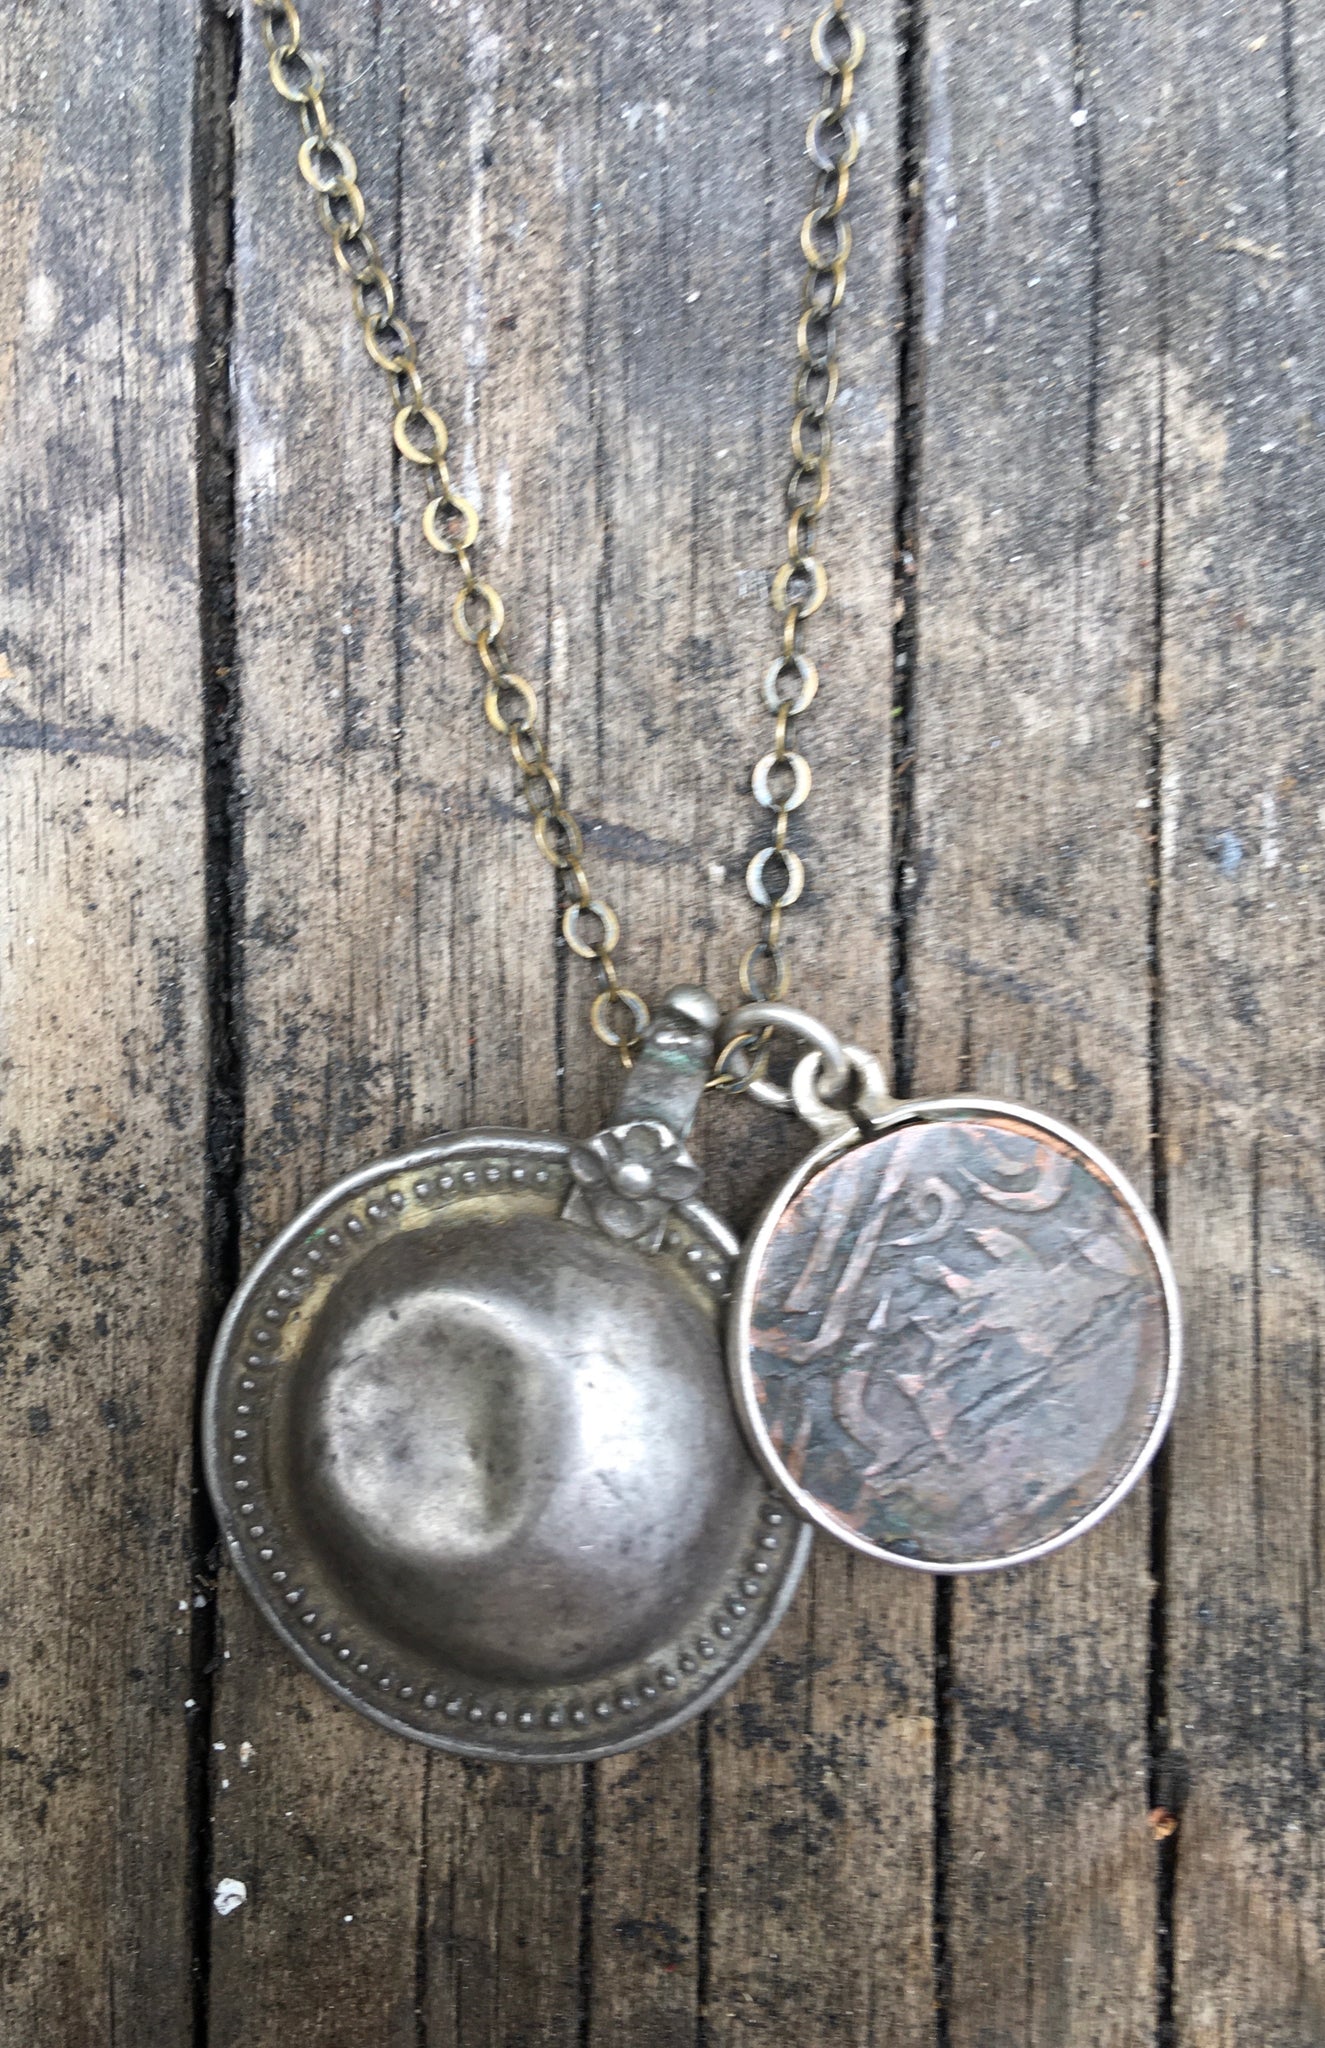 Tribal shield and Arabic coin necklace